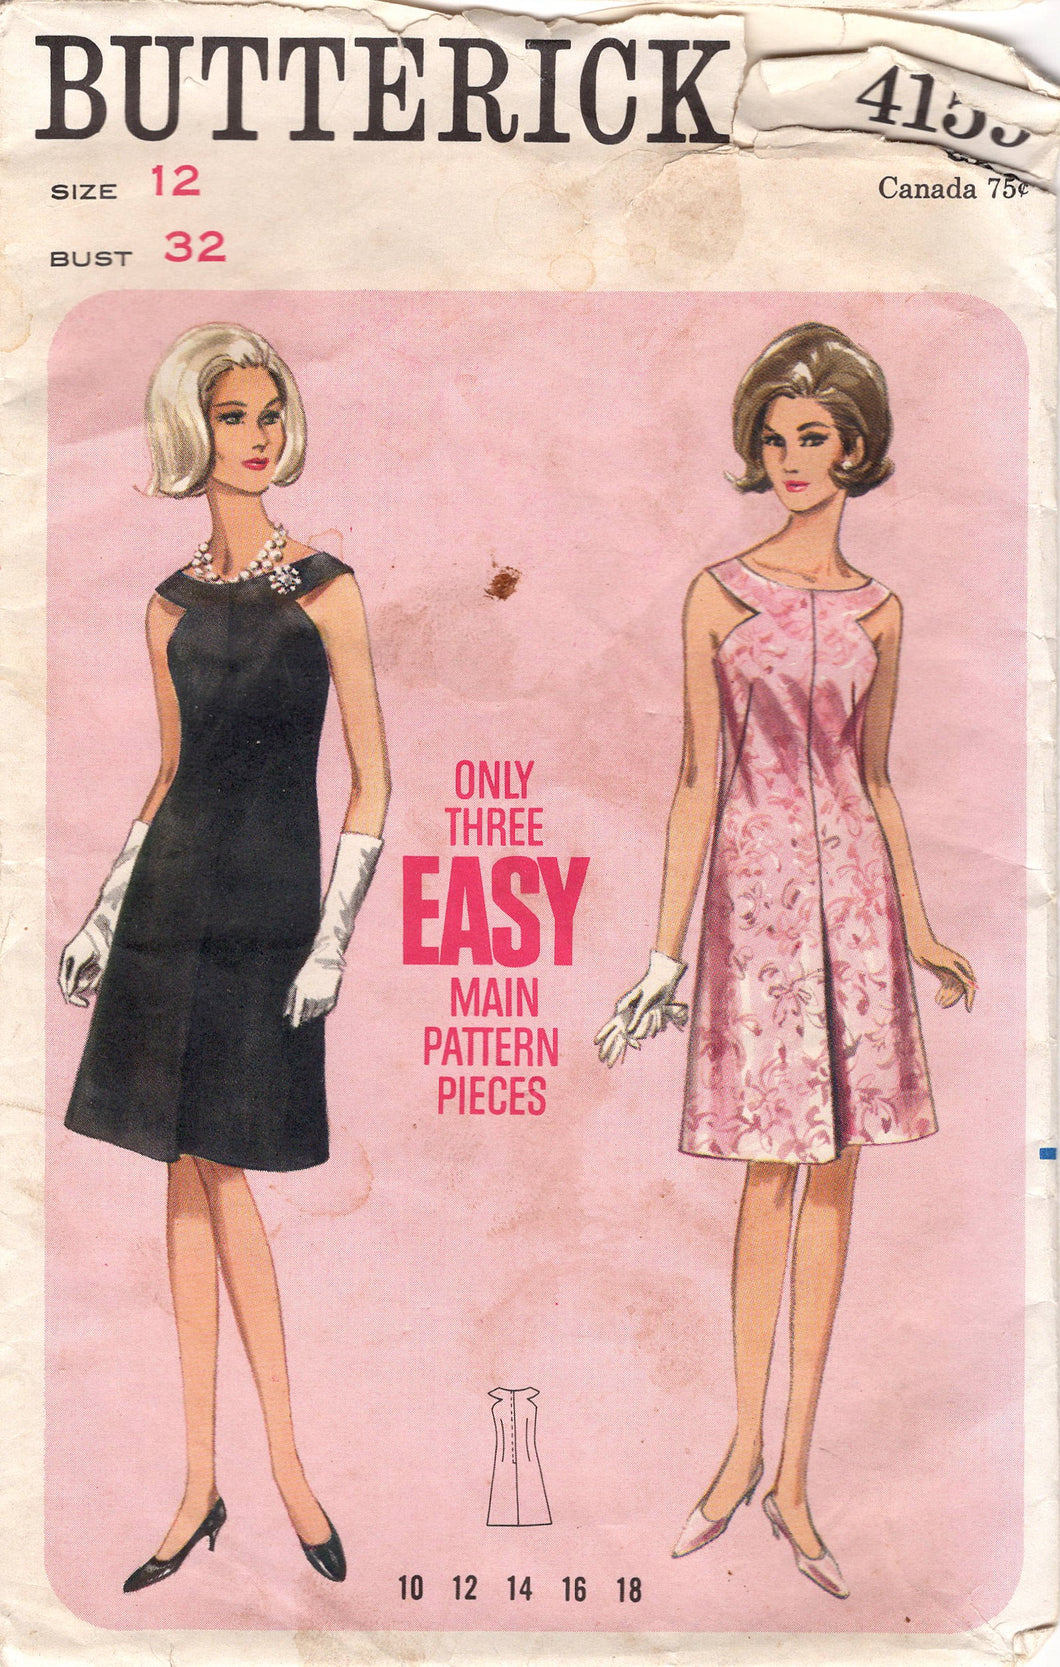 1960's Butterick One-Piece Shift Dress Pattern with Jeweled Neckline - Bust 32